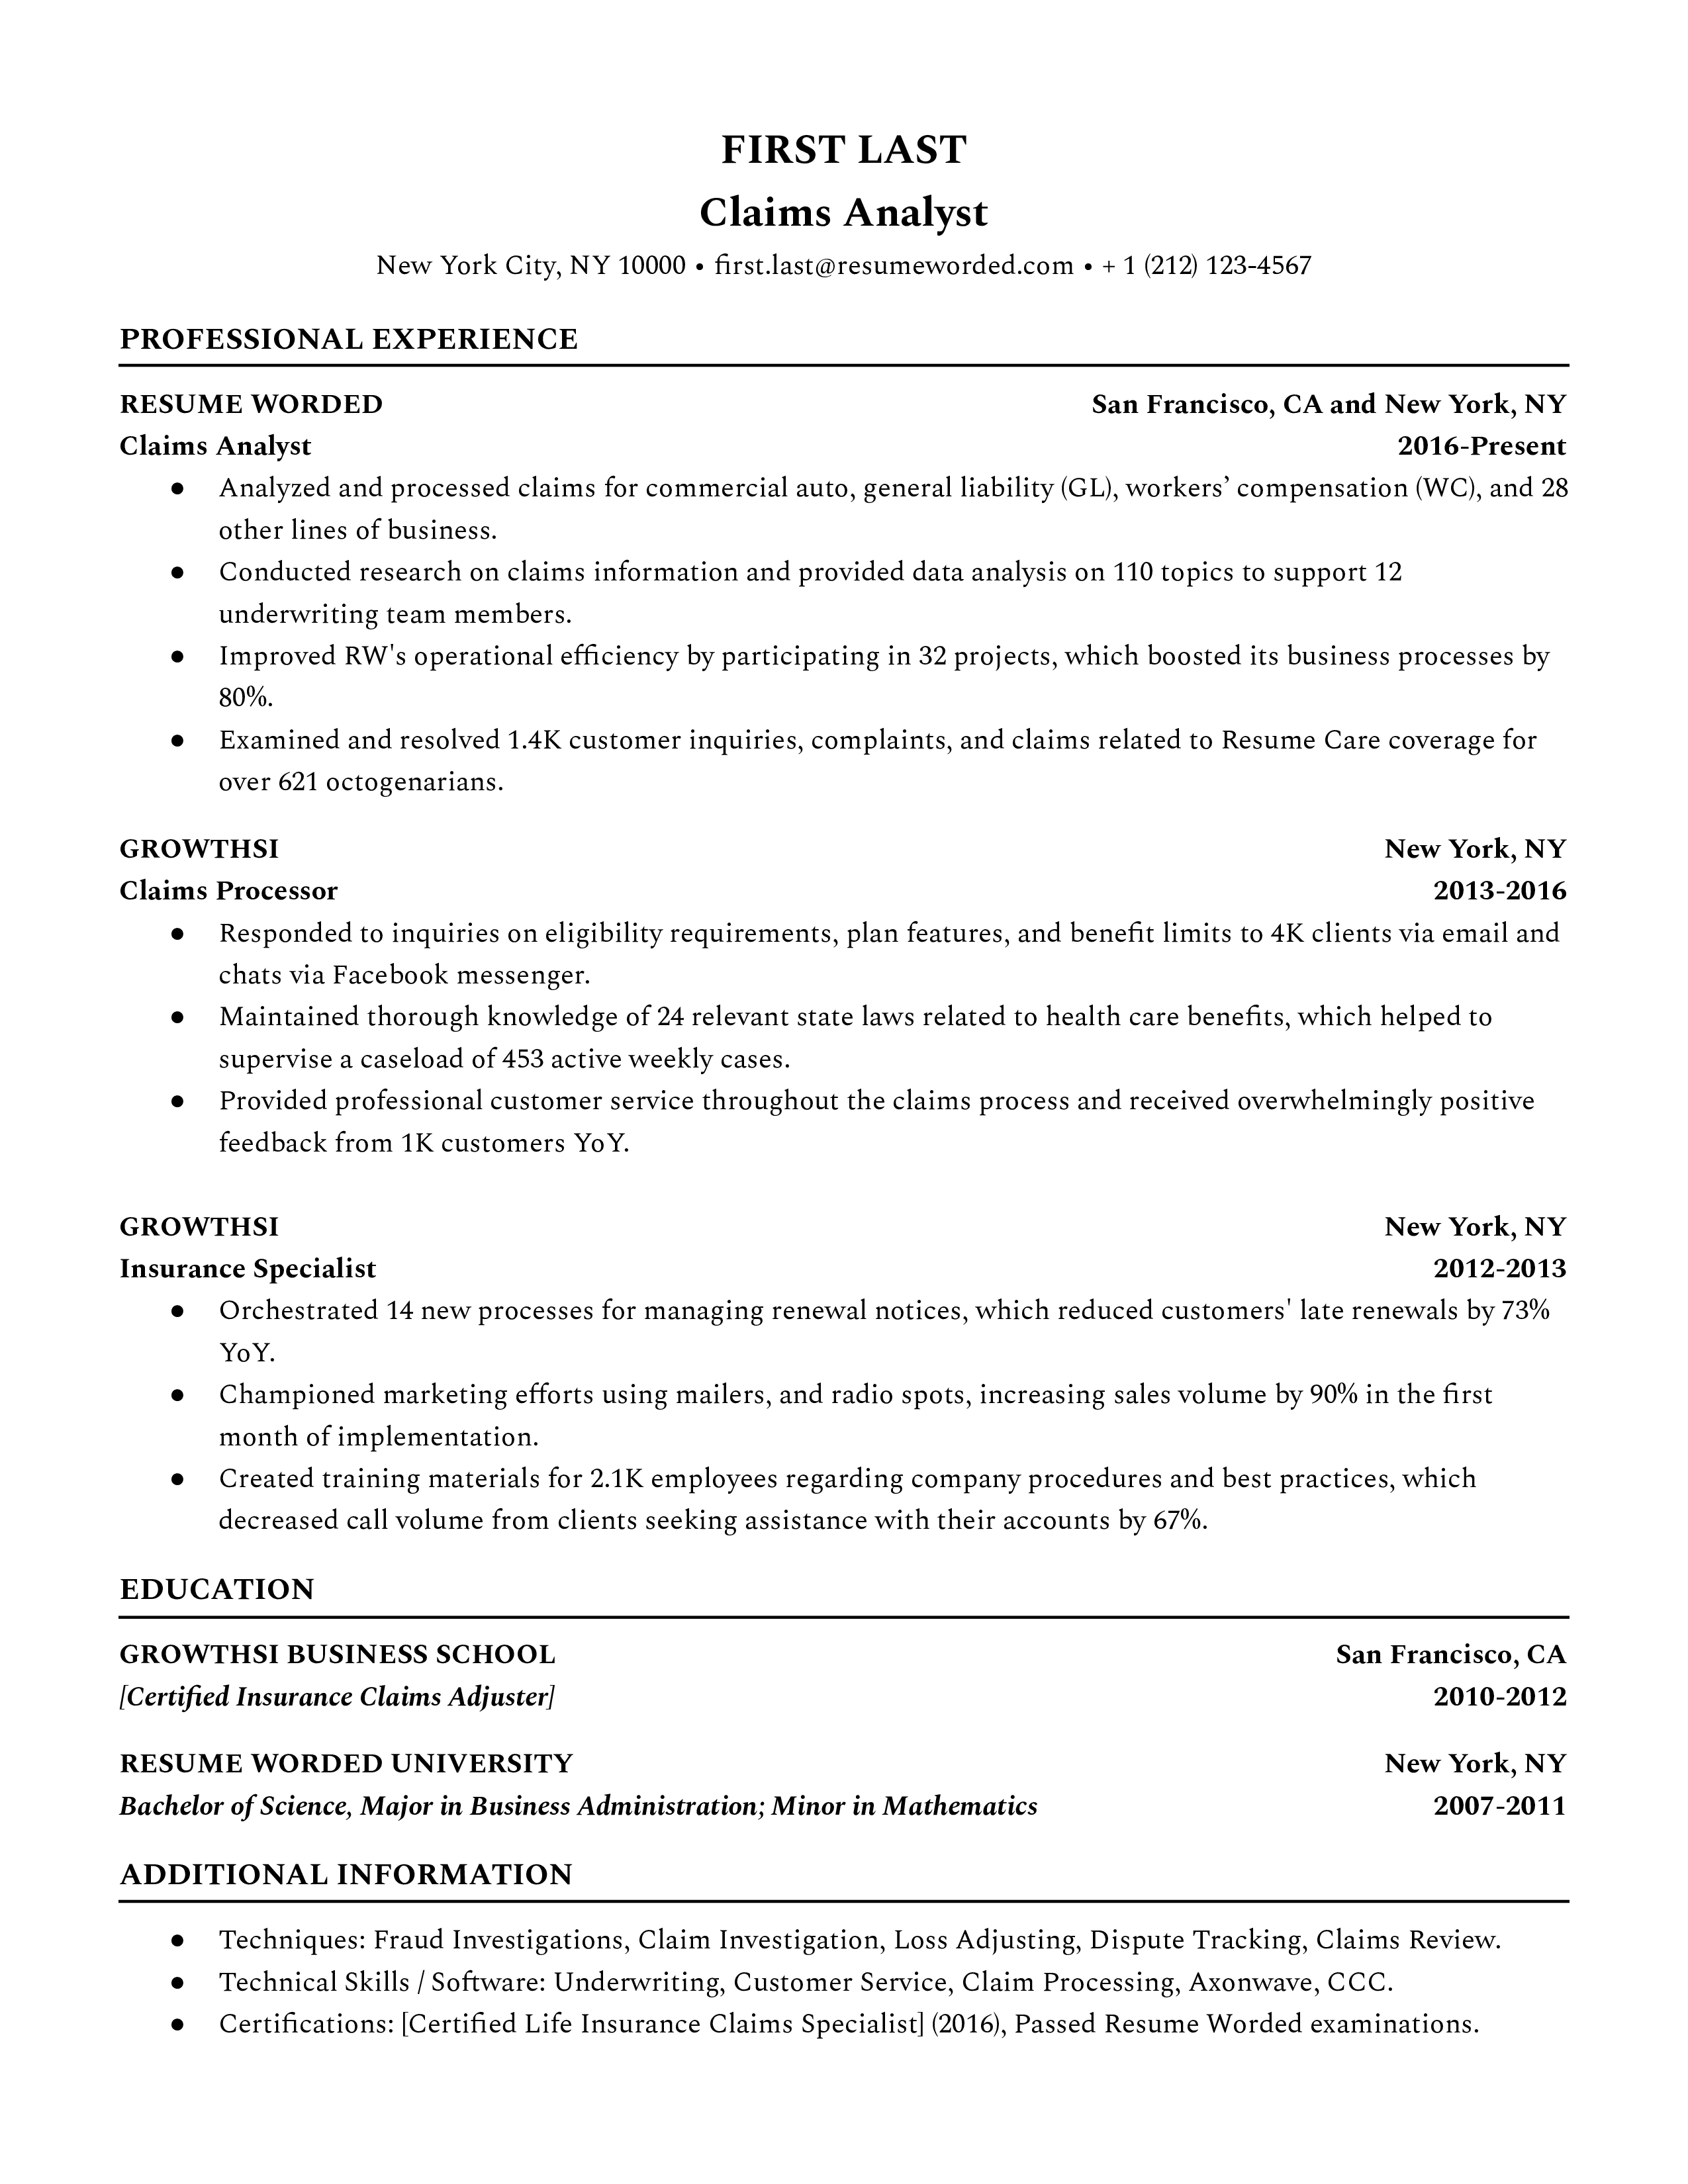 A well-structured CV for a Claims Analyst role showcasing quantitative abilities and tech-savviness.